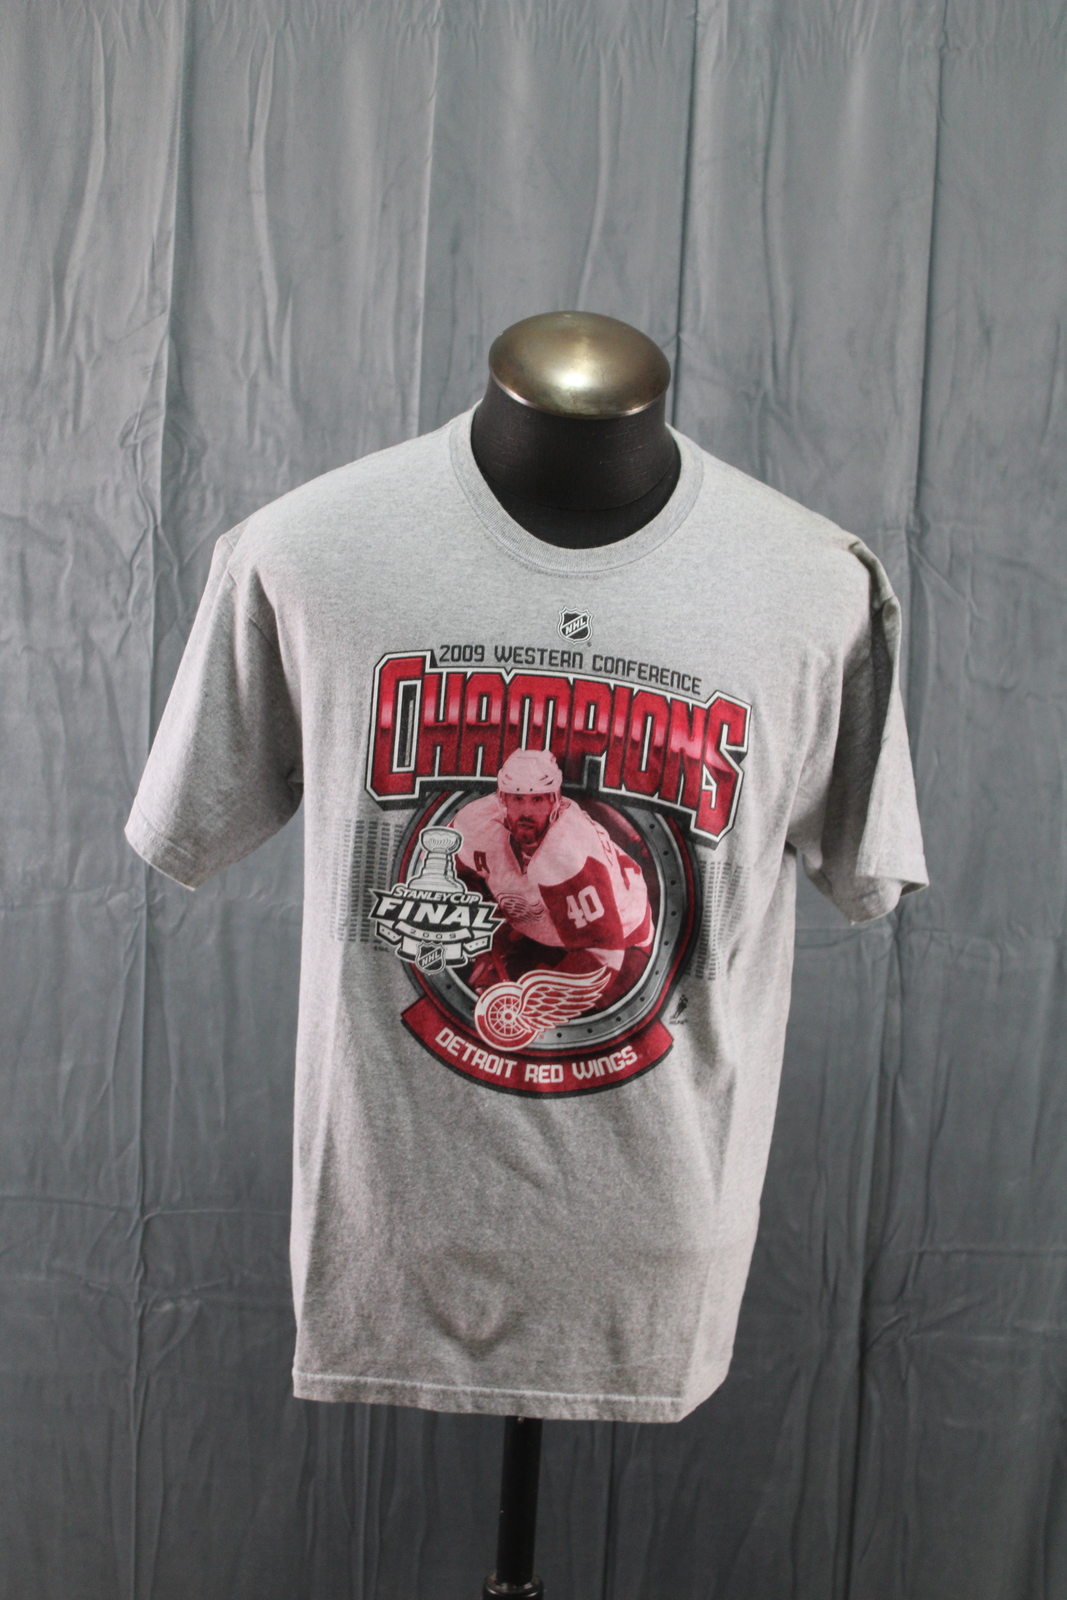 Detroit Red Wings Shirt (Retro) - 2009 Western Conference Champions - Mens Large - $45.00